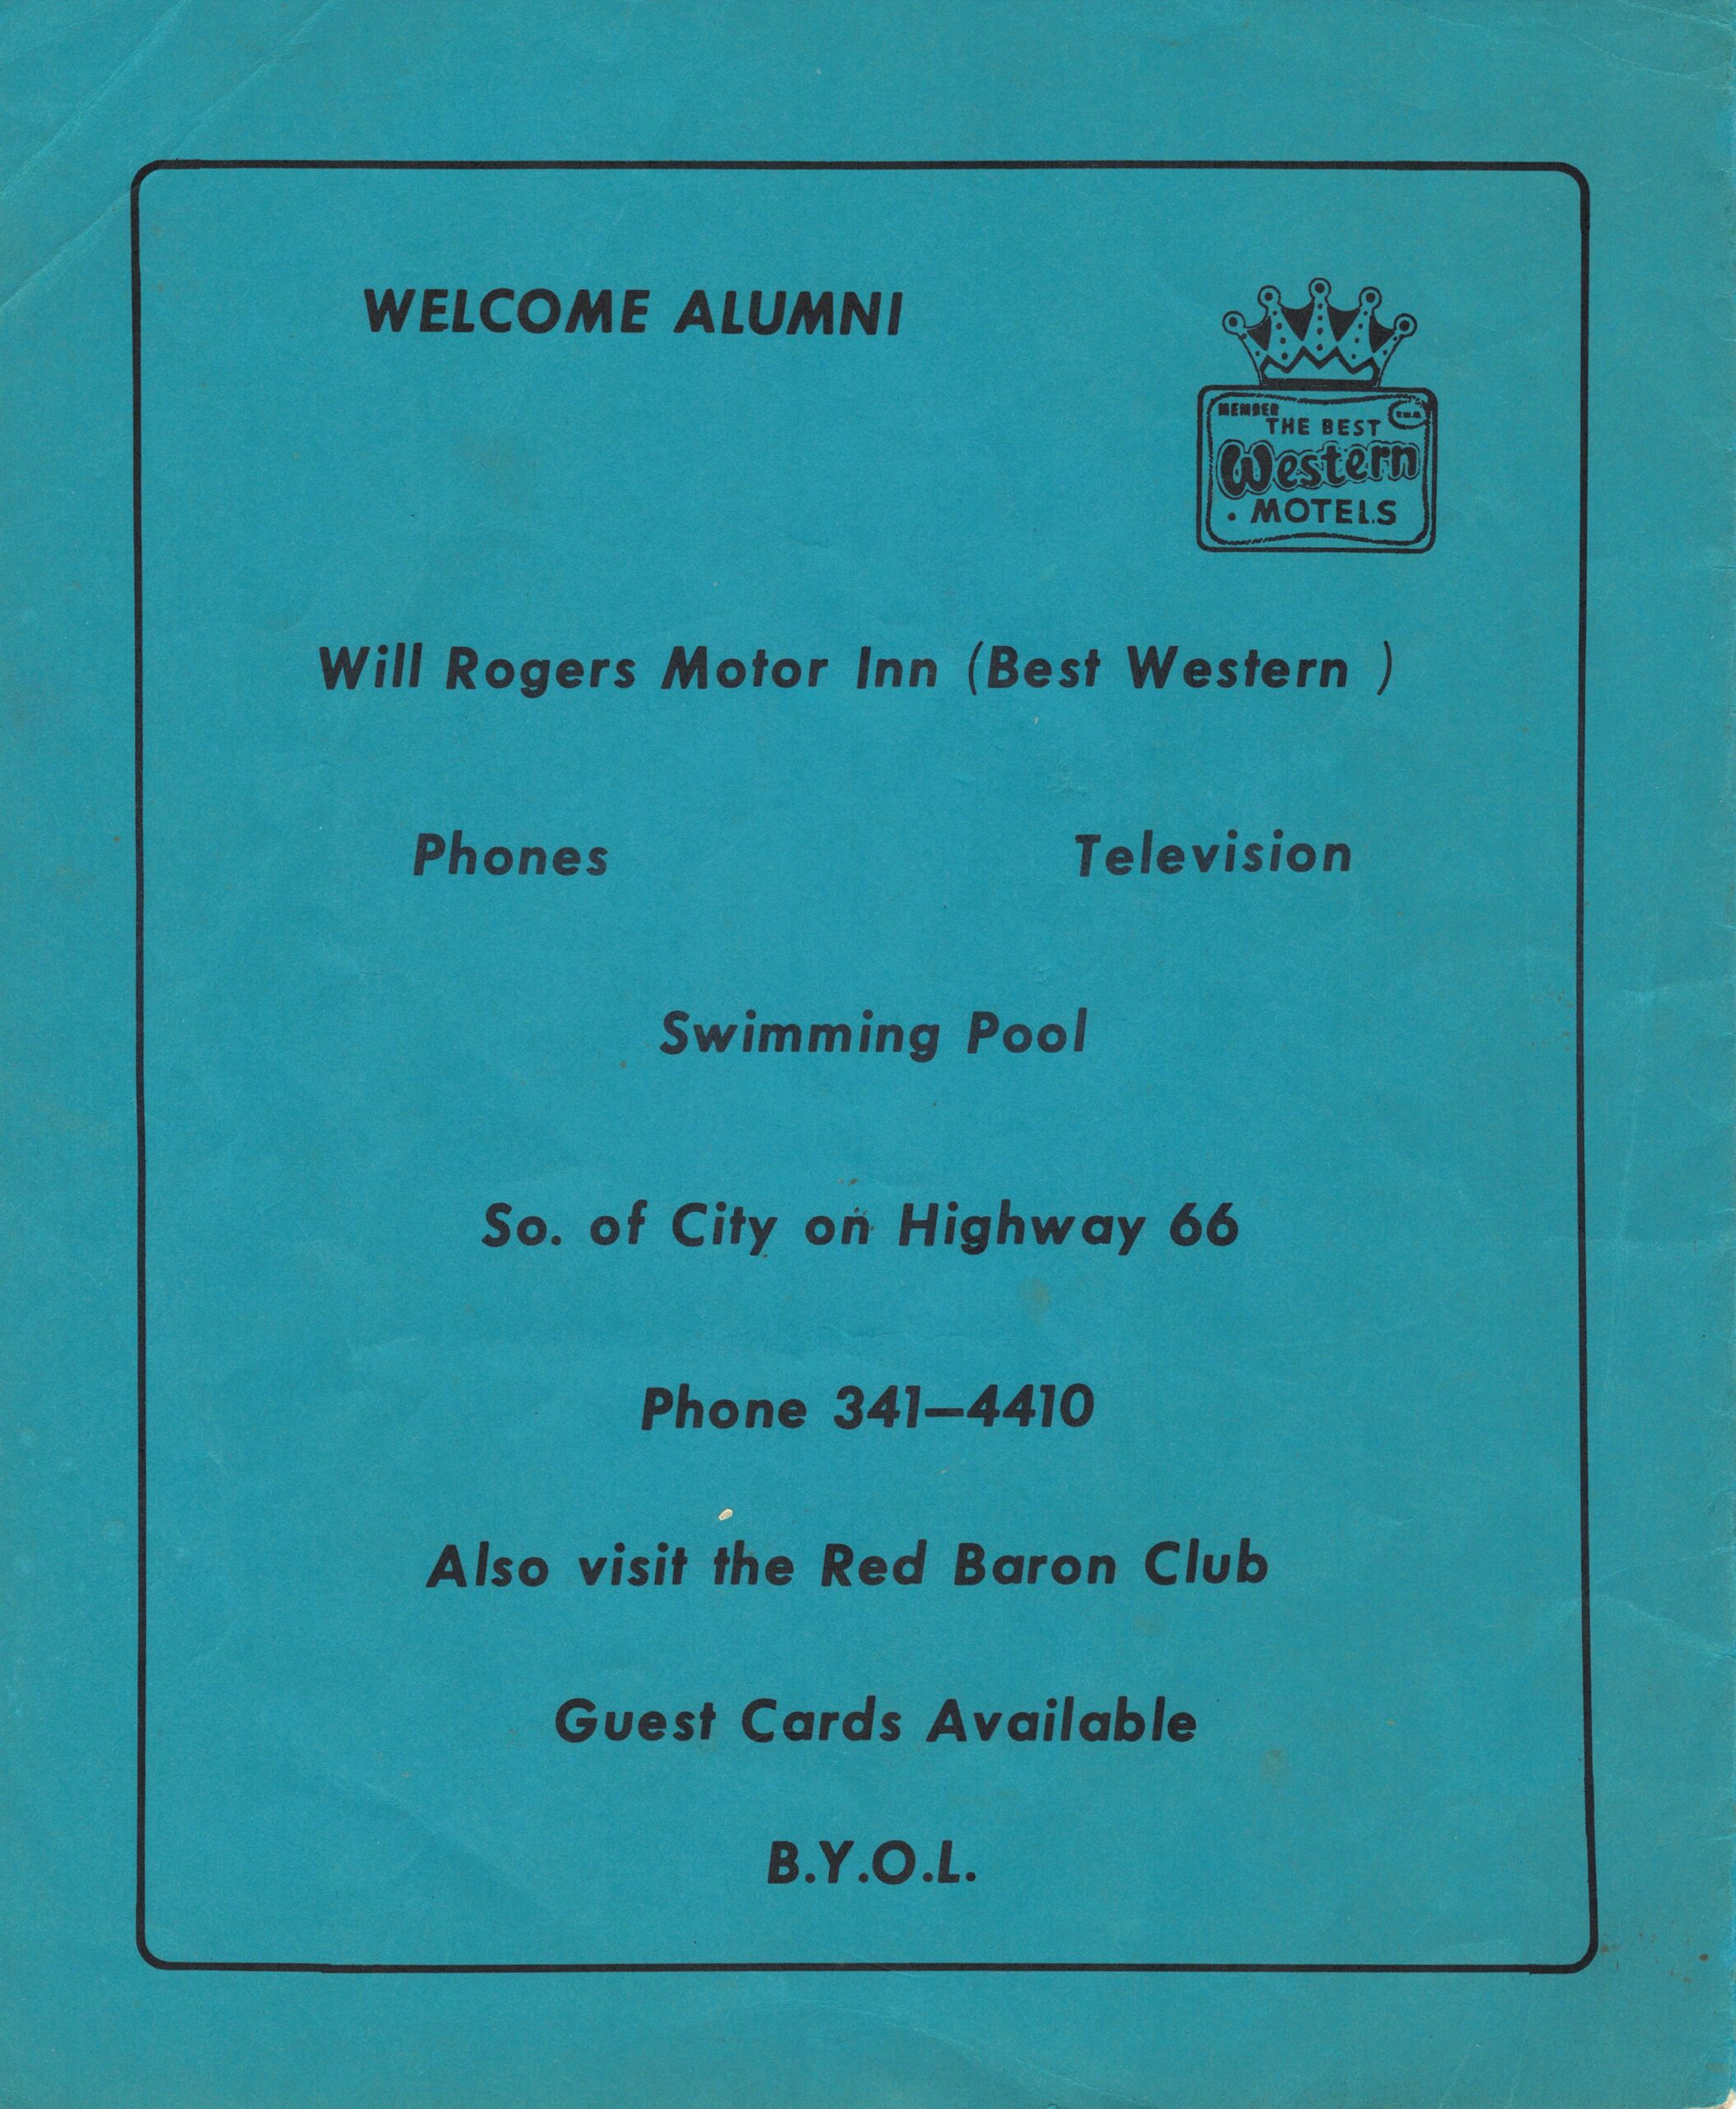 Back cover of 1982 Lincoln student reunion pamphlet with motel ad